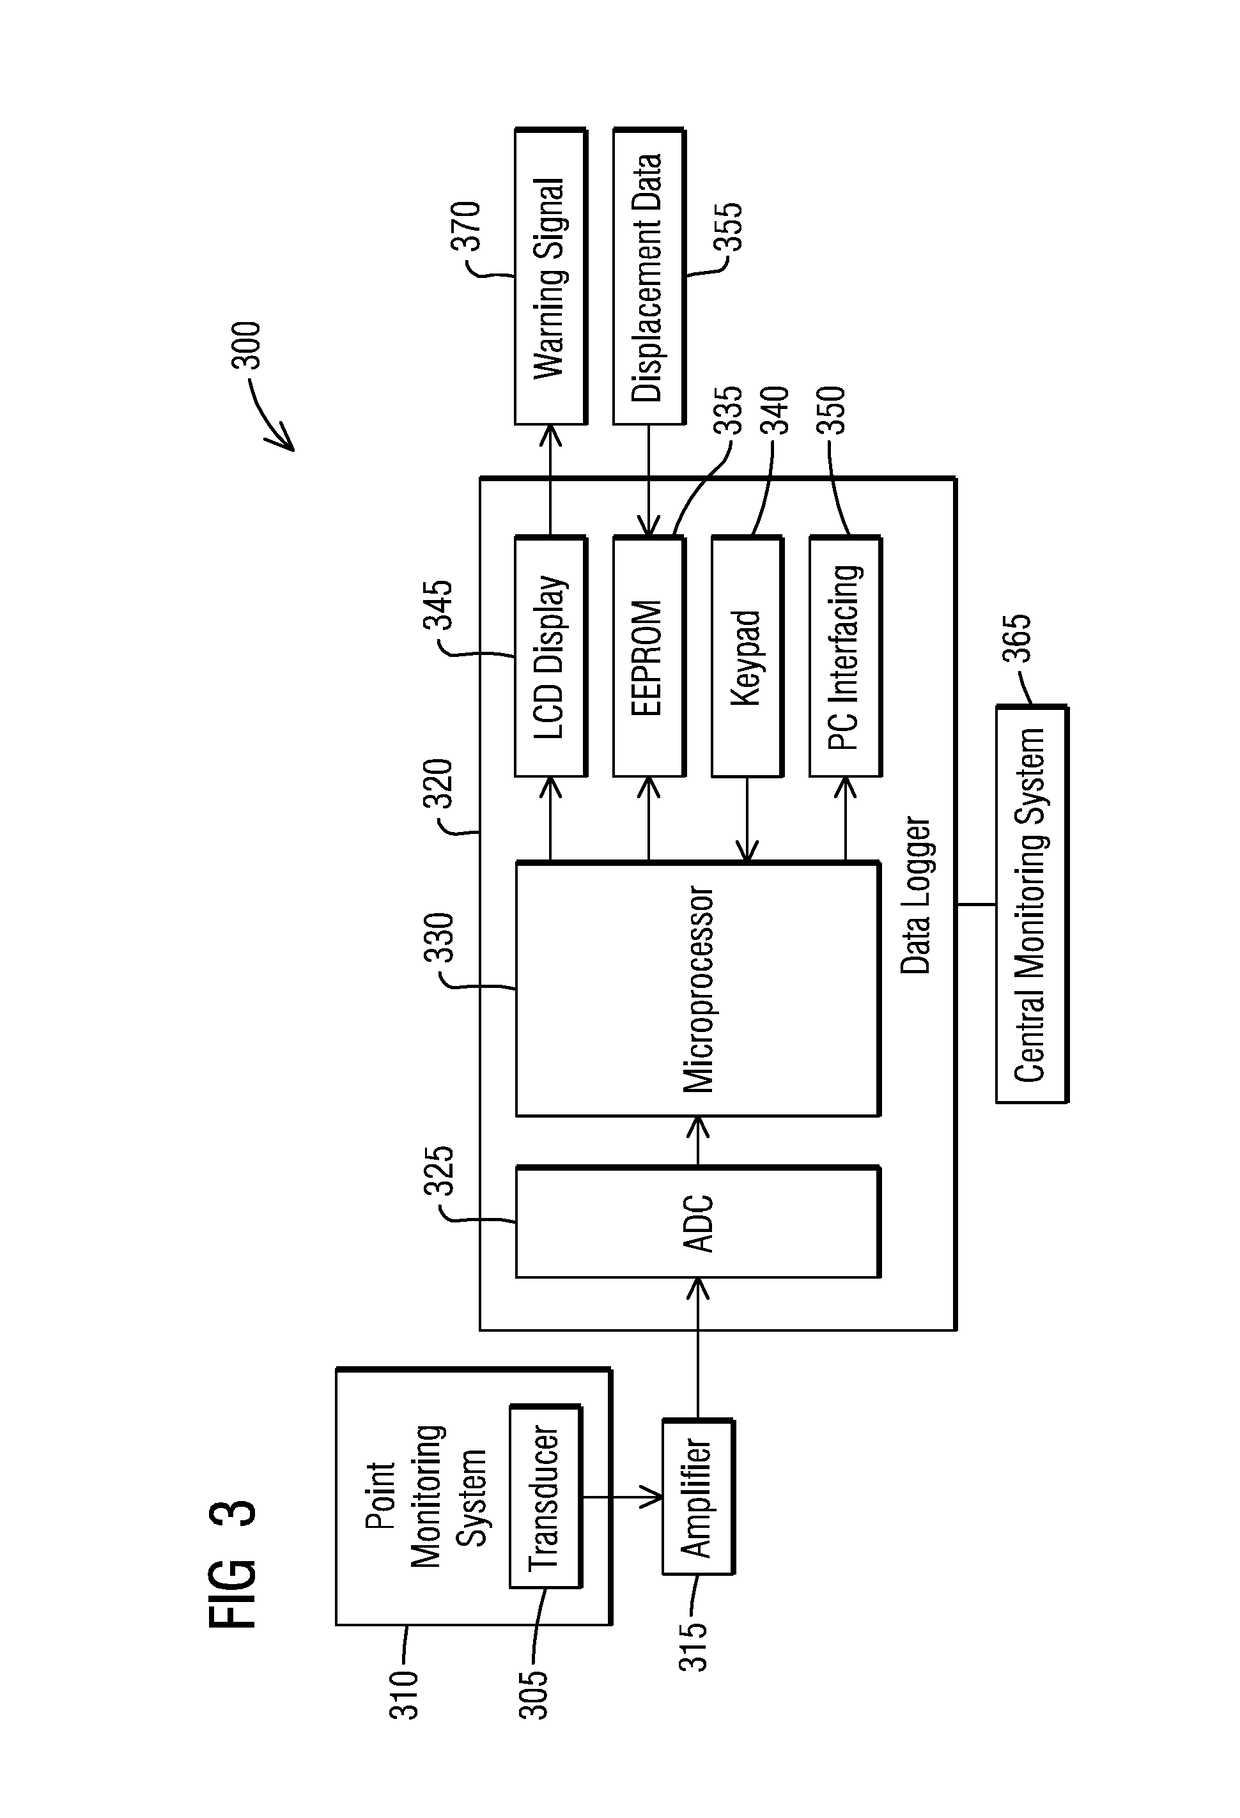 Railway track displacement measurement system and method for proactive maintenance